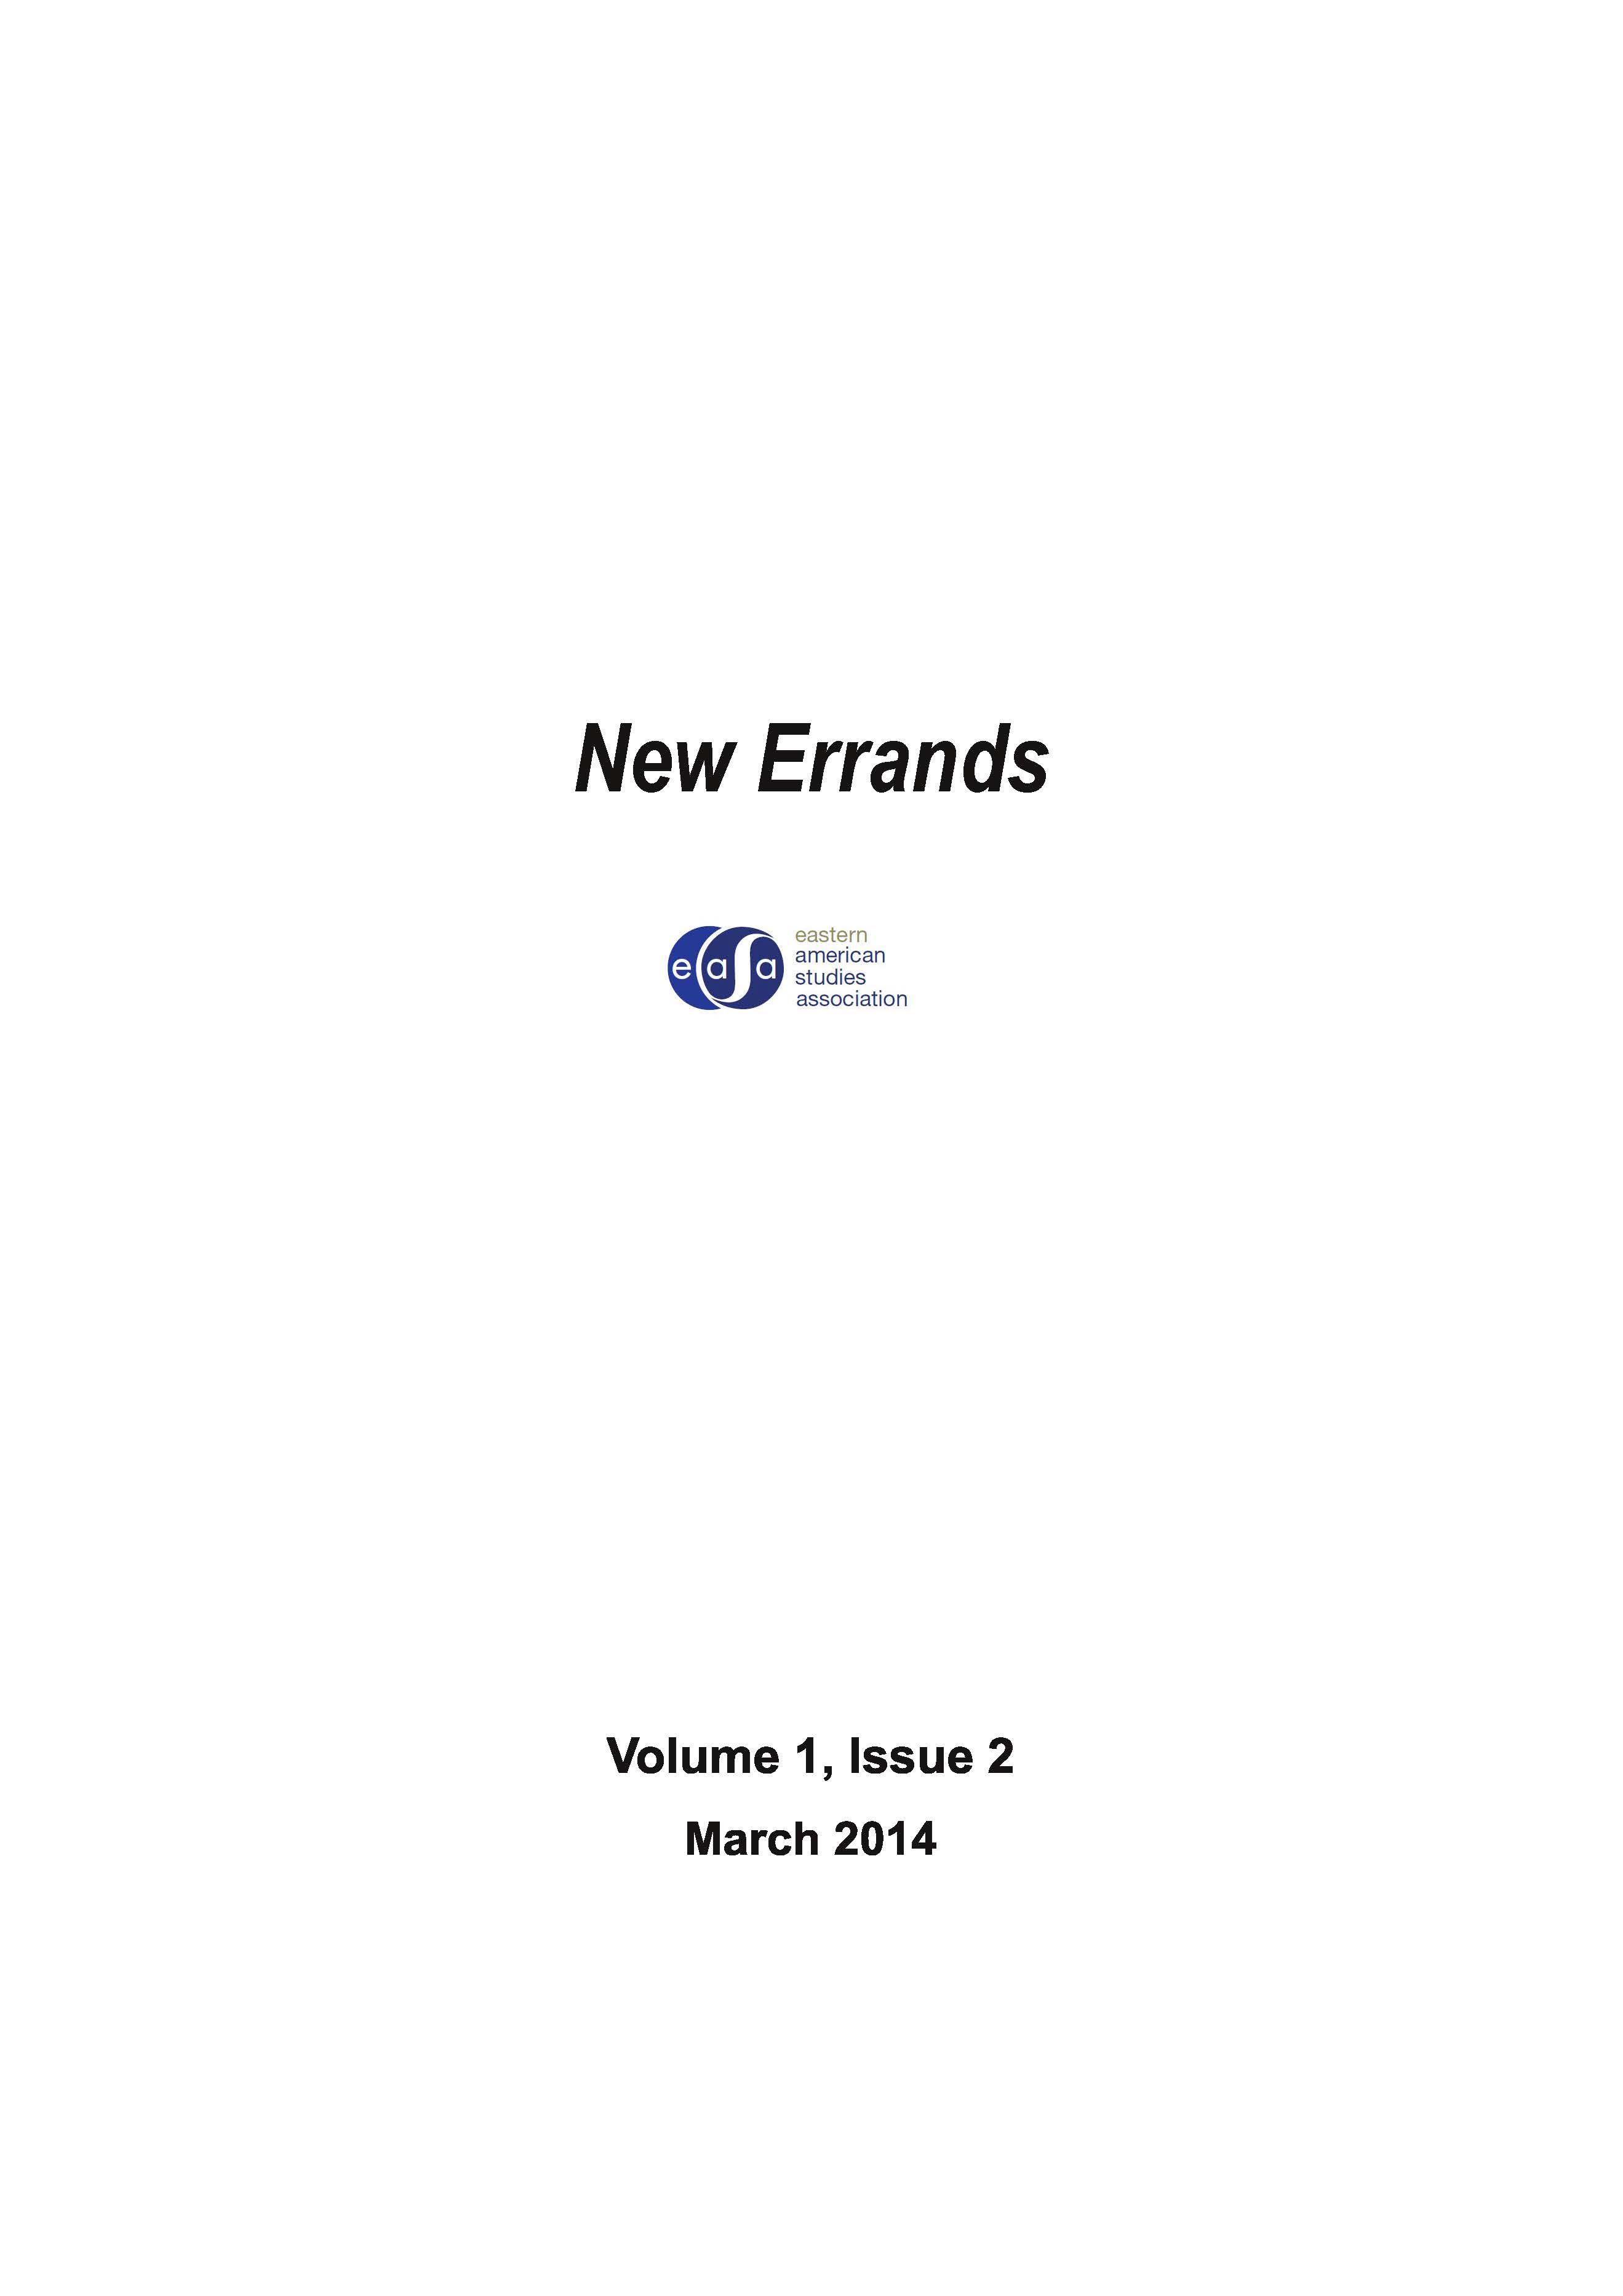 					View New Errands Volume 1 Issue 2 (Spring 2014)
				